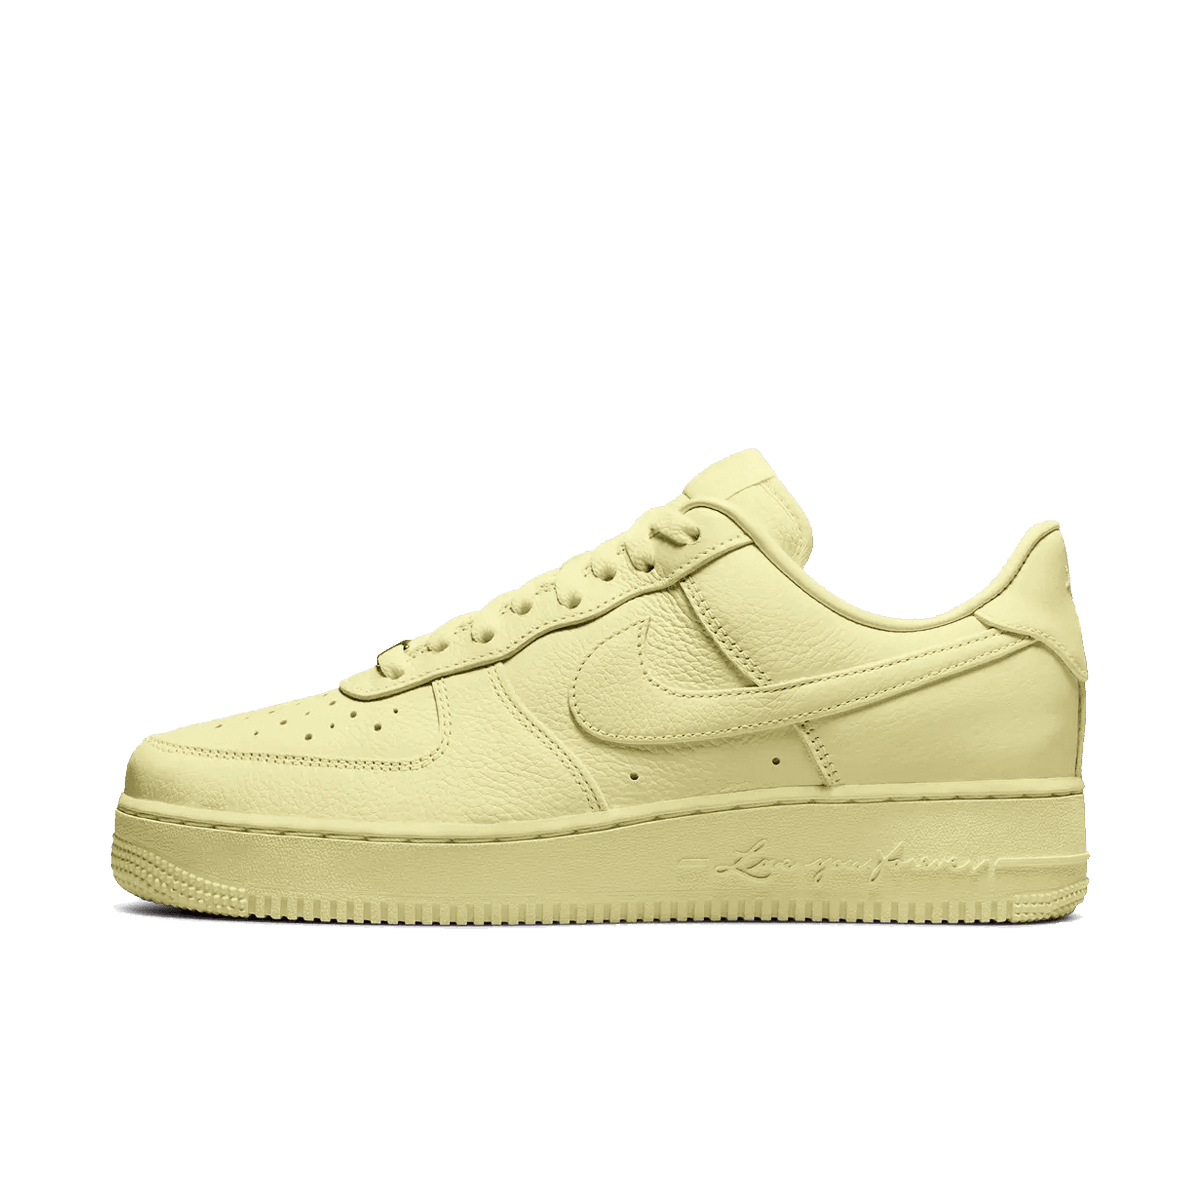 NOCTA x Nike Air Force 1 'Citron Tint' - Certified Lover Boy Pack